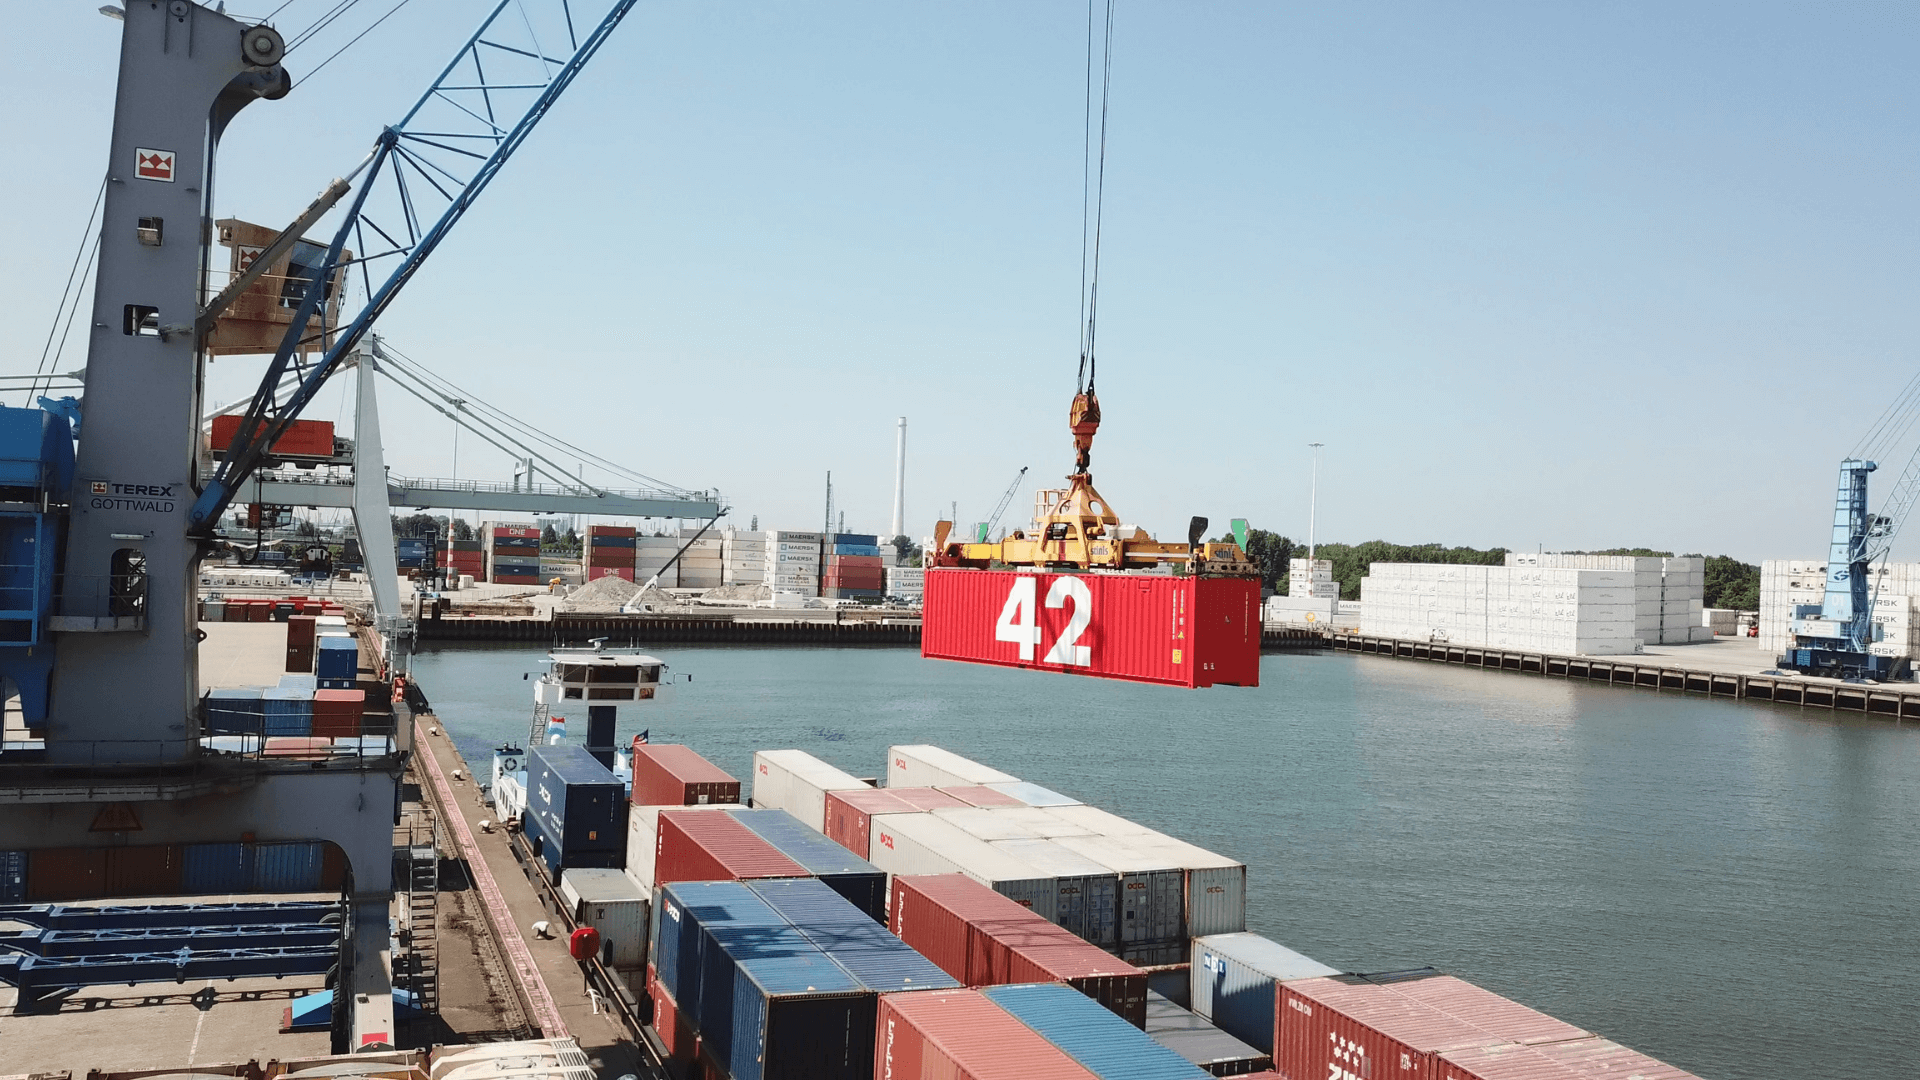 Container 42 in action